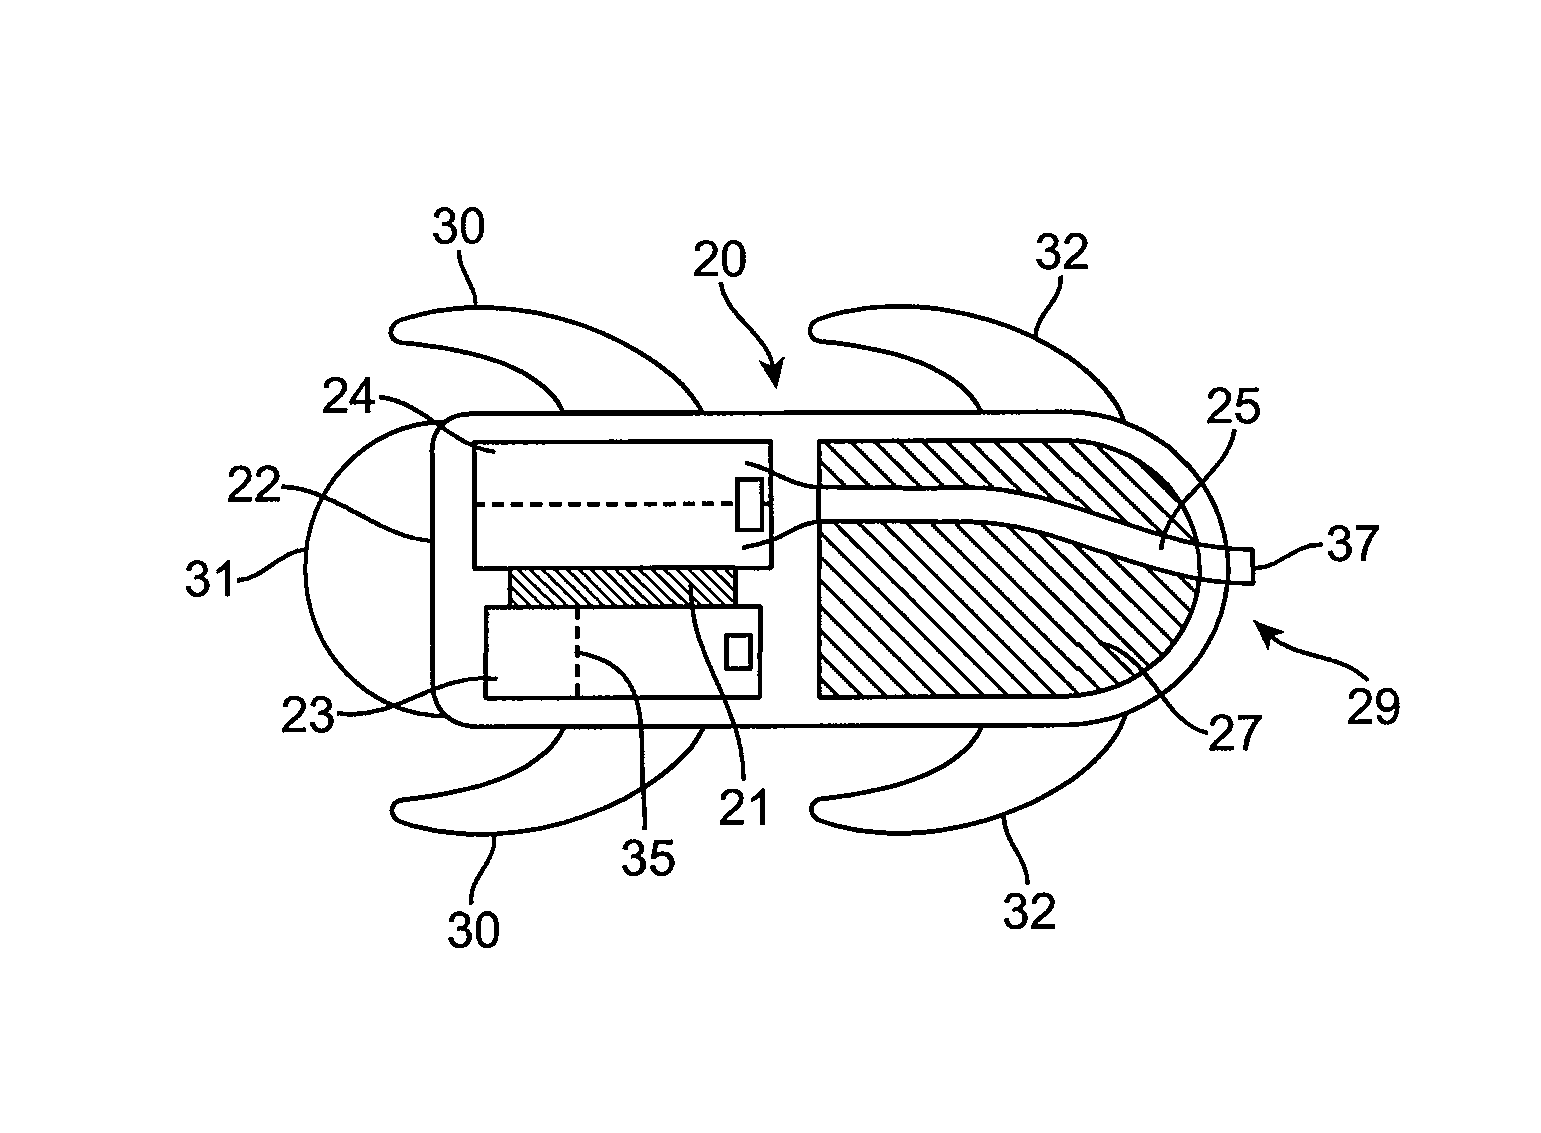 Combined microphone and receiver assembly for extended wear canal hearing devices